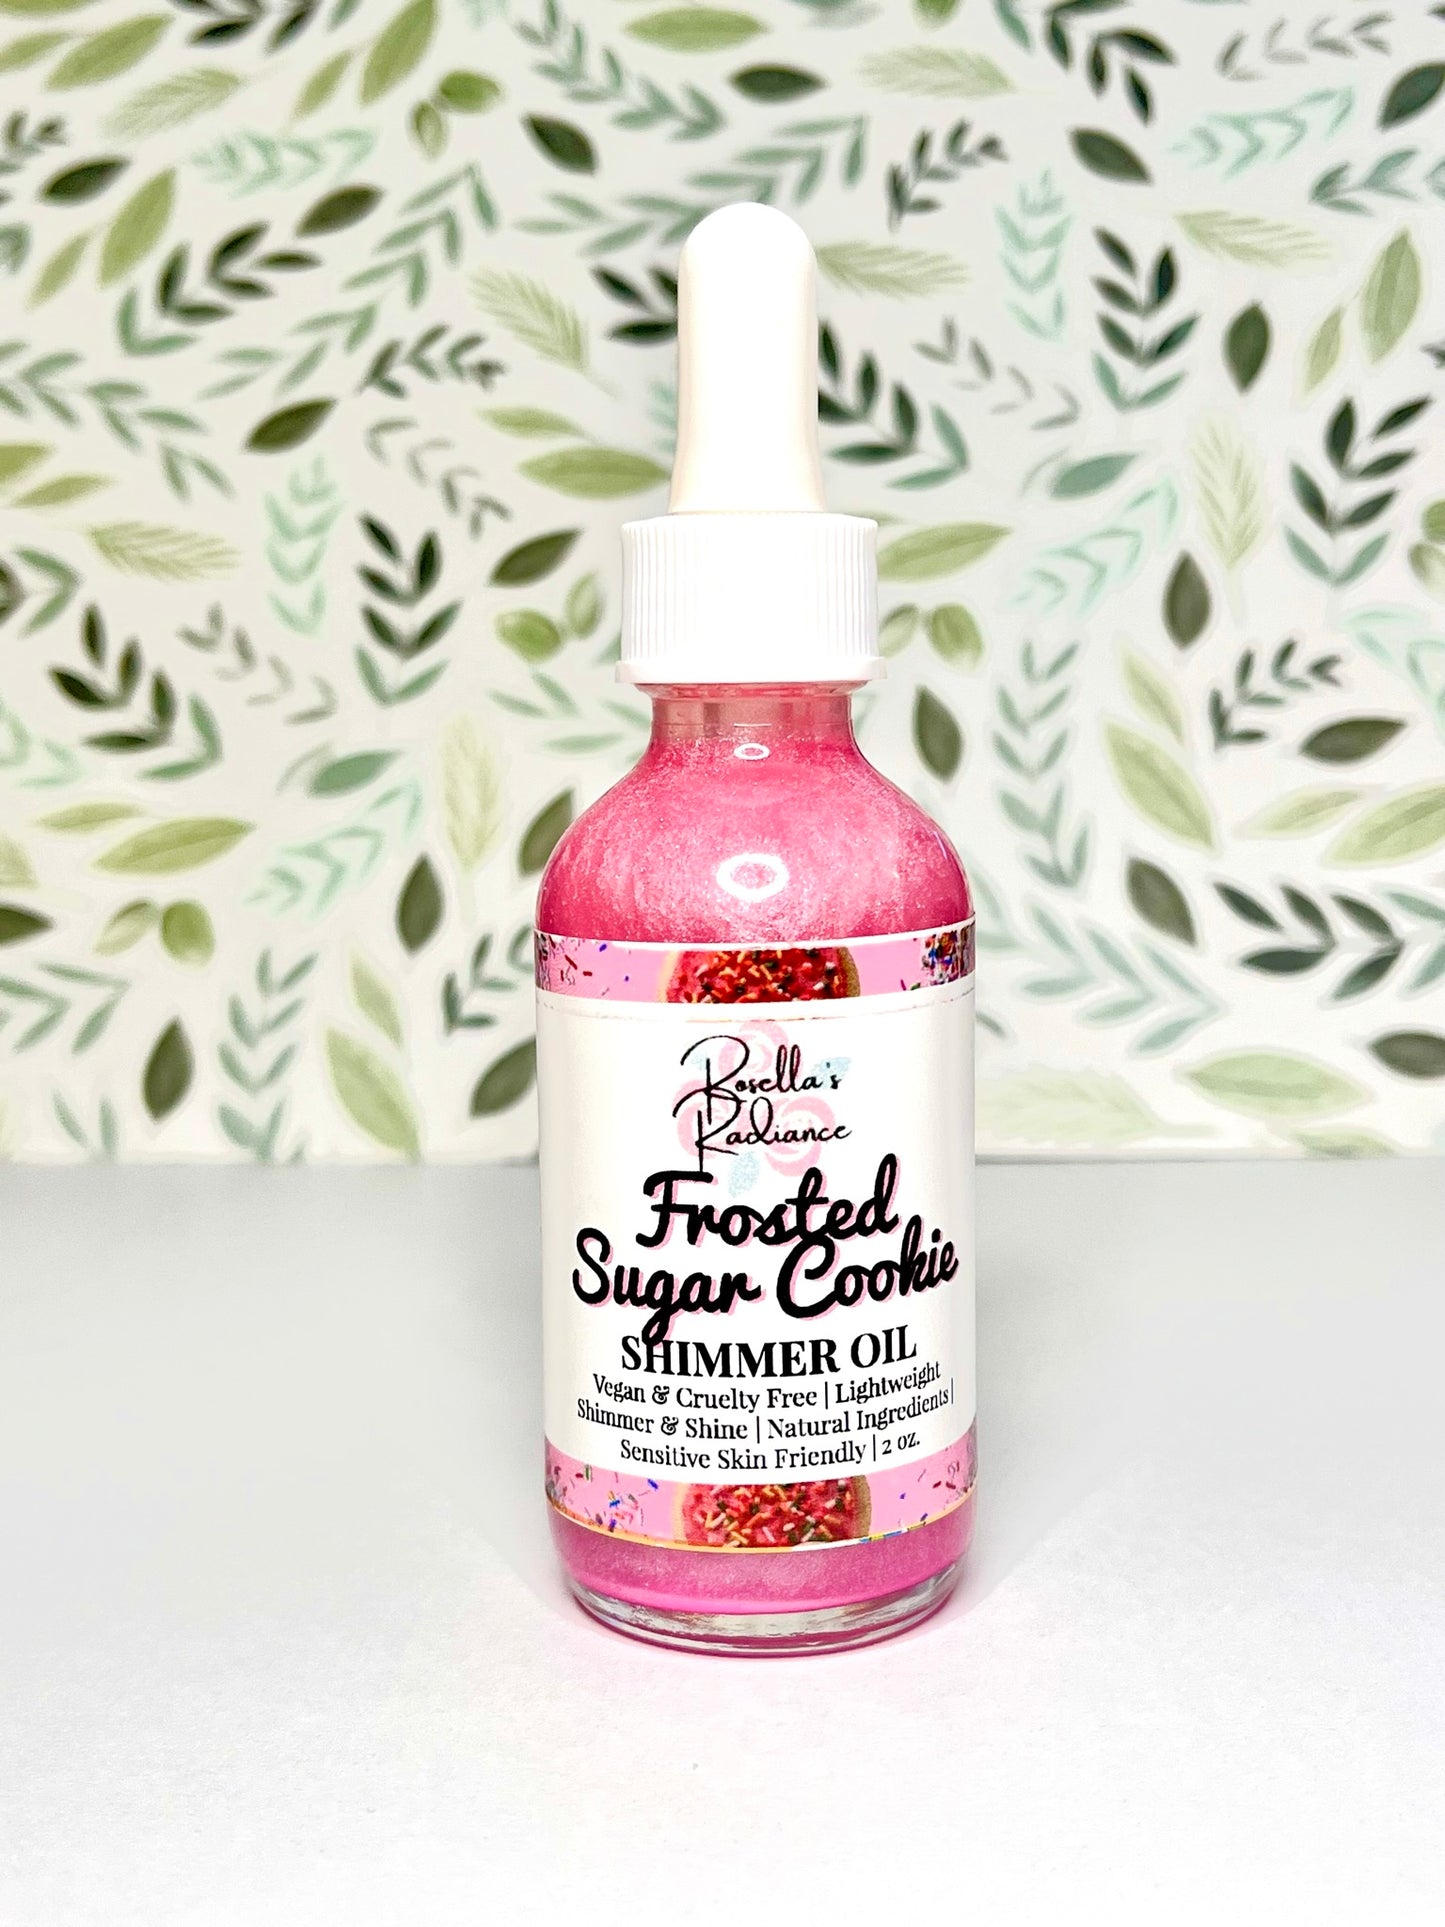 Frosted Sugar Cookie Shimmer Oil